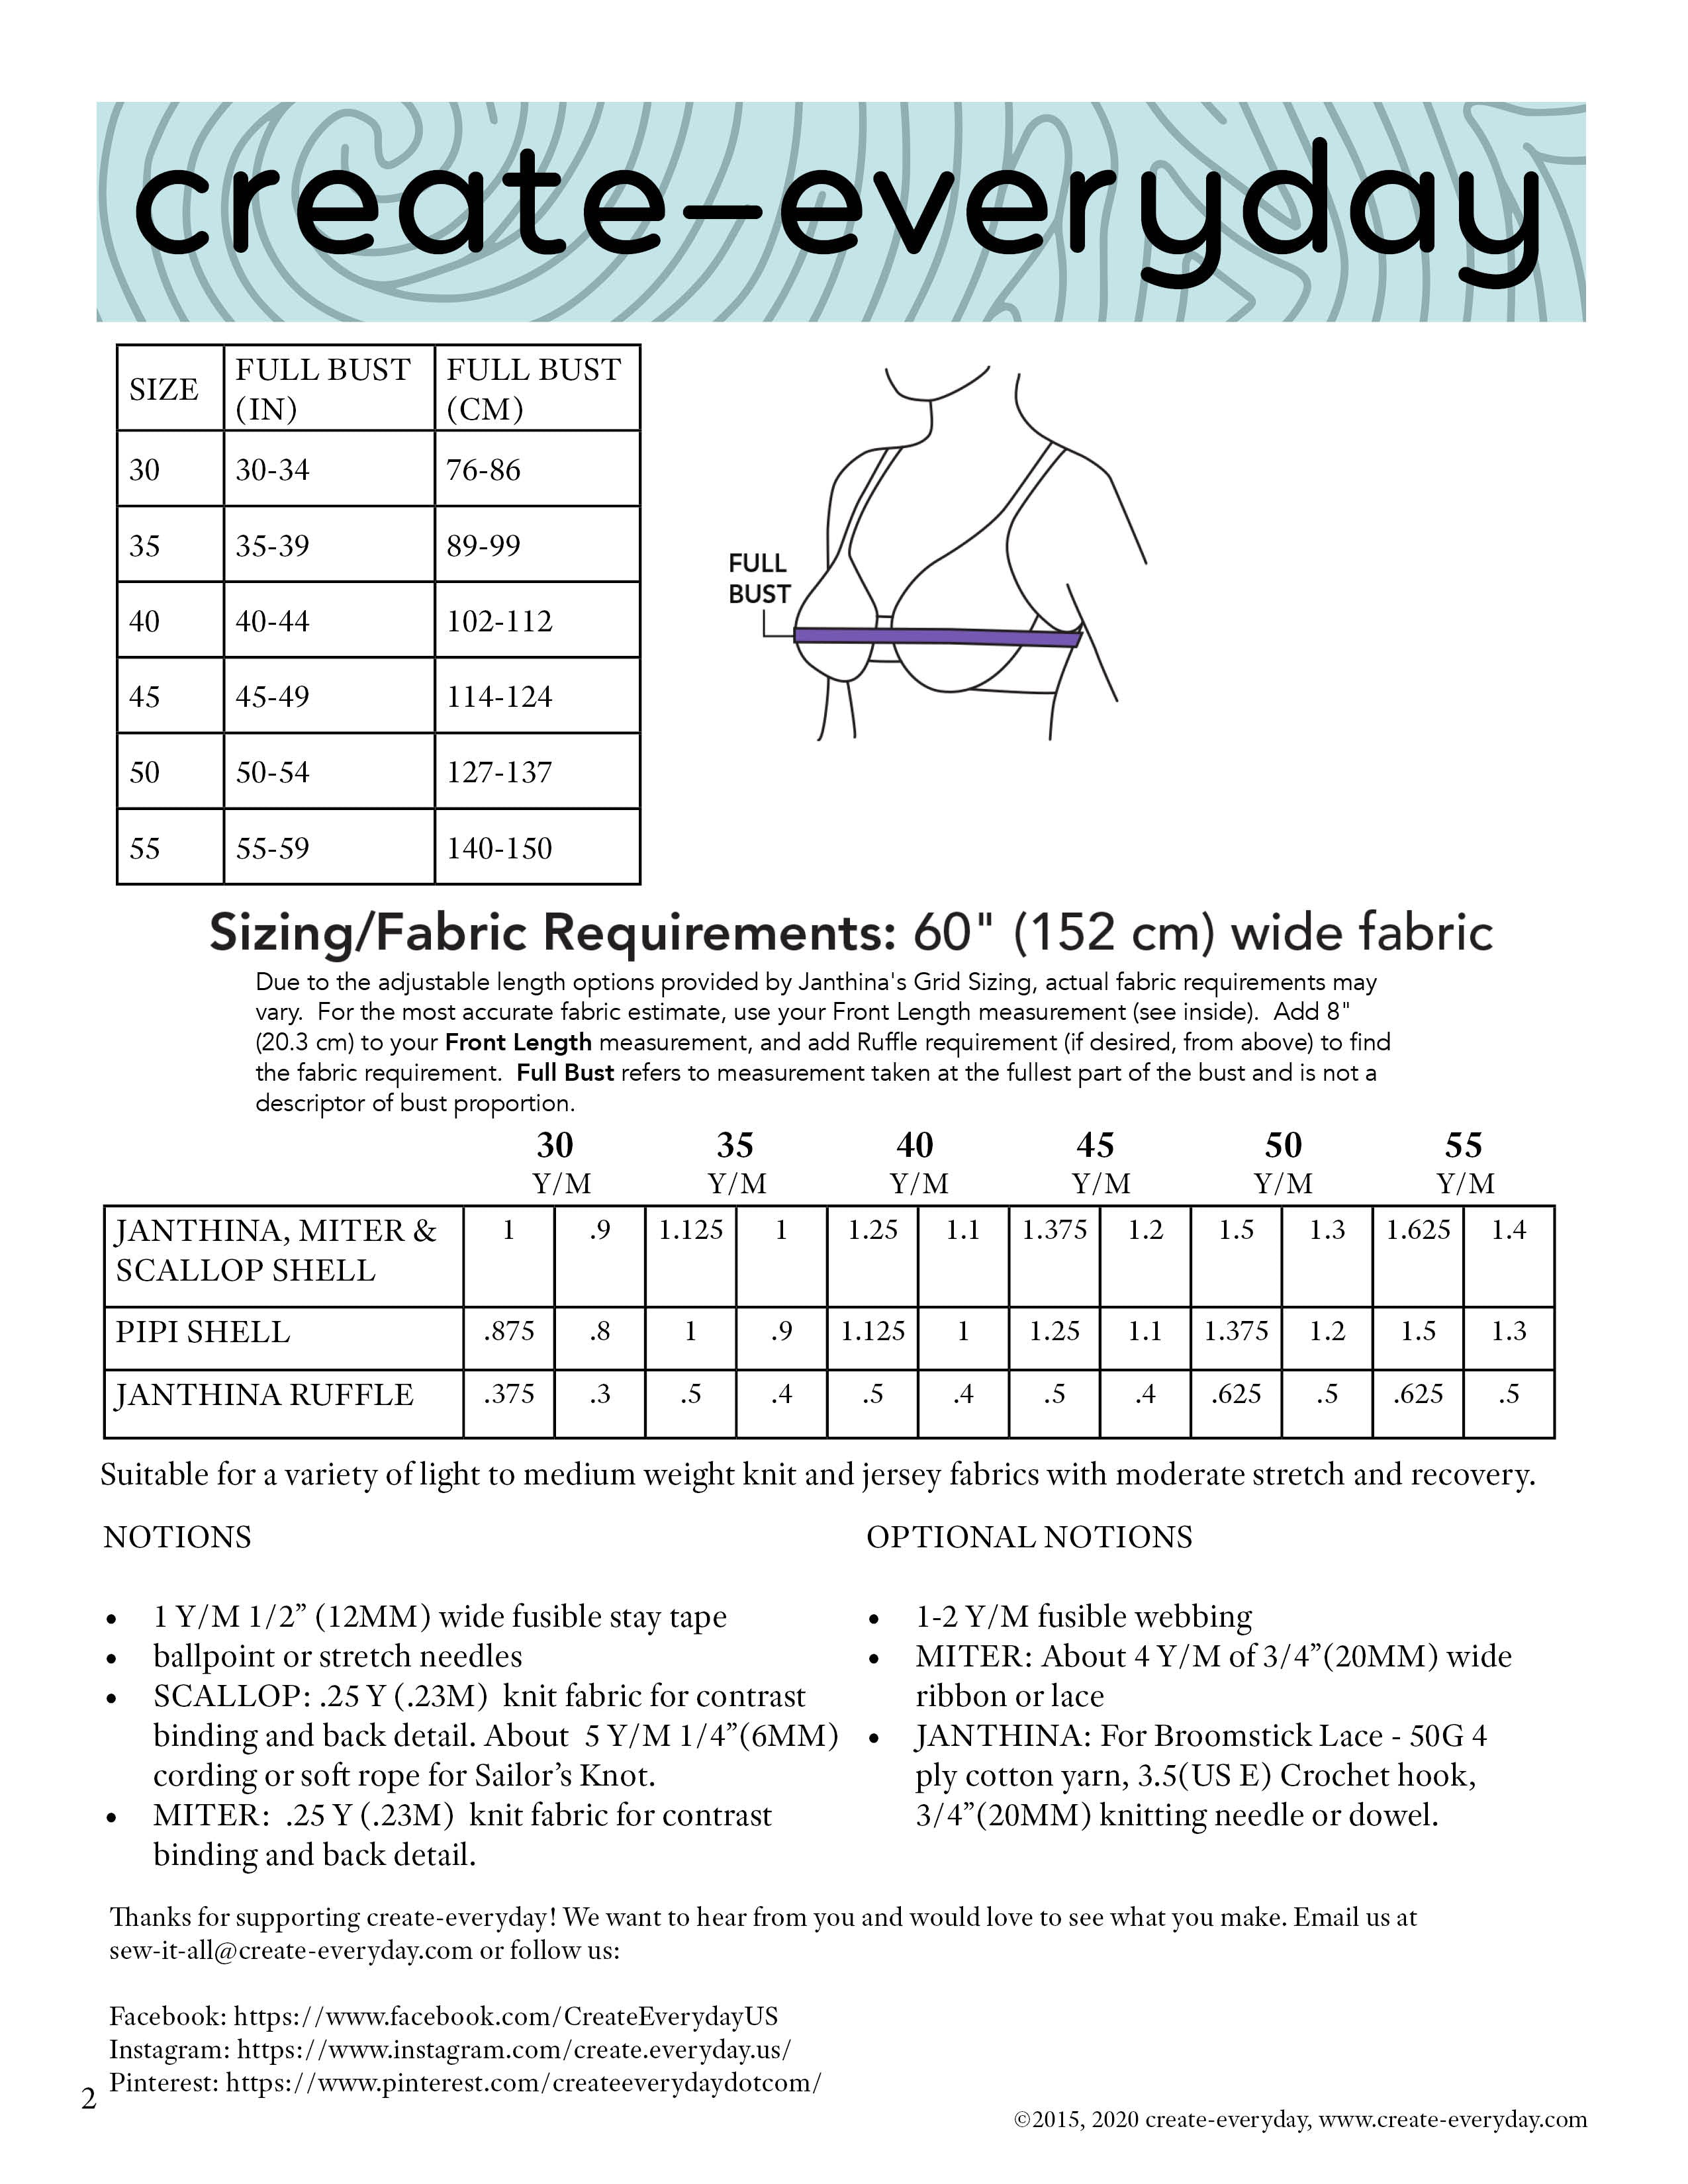 Basic Bra Pattern Block With Detailed Sewing and Fitting Guide PDF